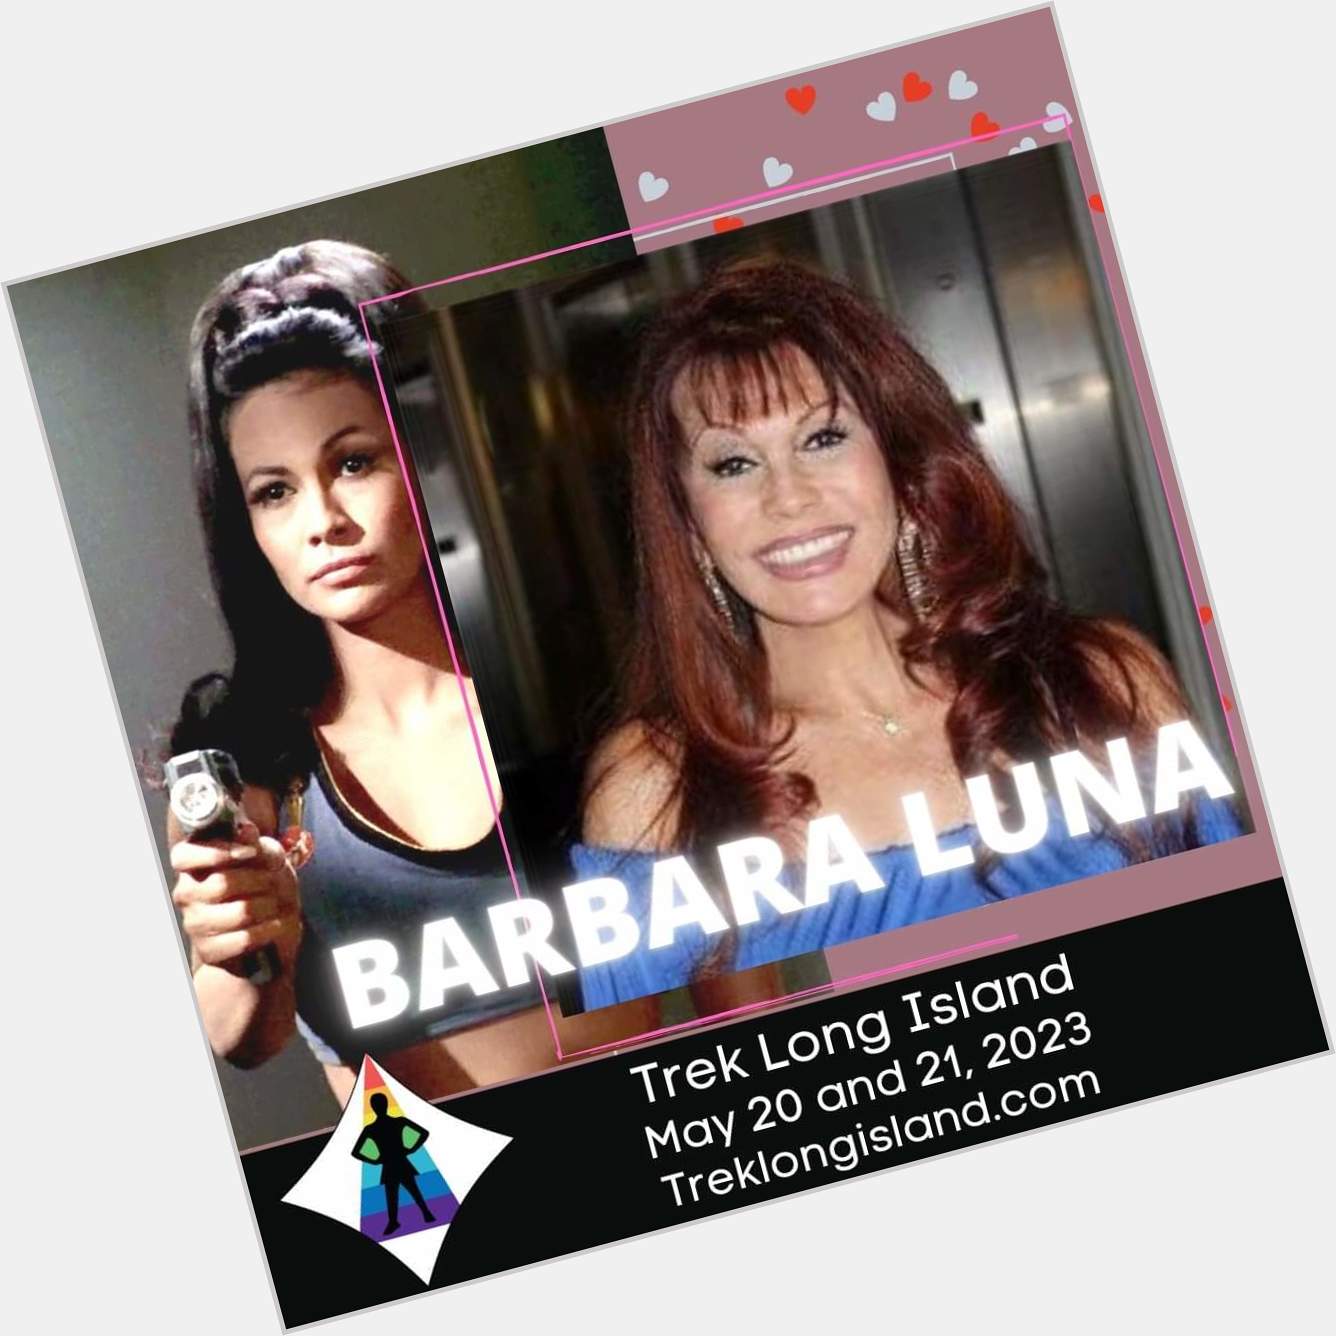 HAPPY BIRTHDAY TO THE LOVELY BARBARA LUNA FROM ALL OF US HERE AT TREK LONG ISLAND!!!!!!!!!!      See you in May! 